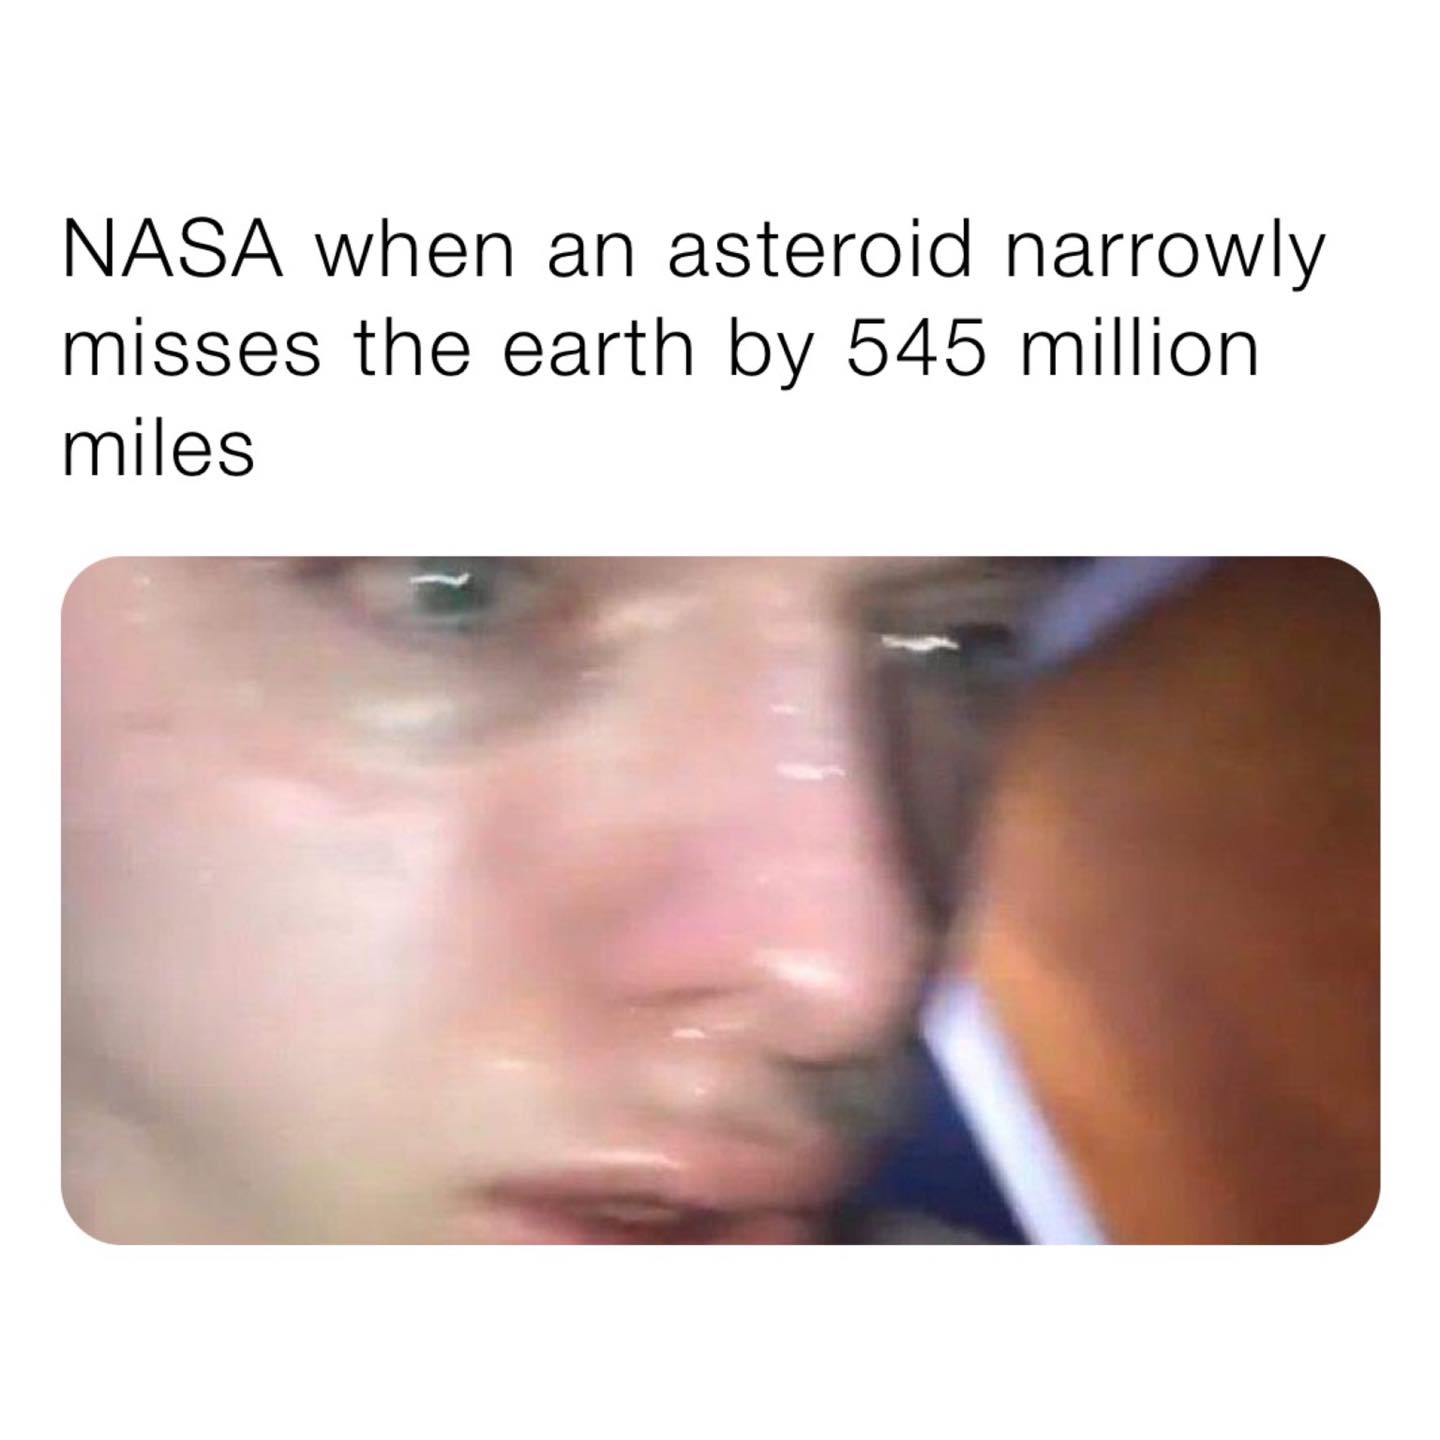 lip - Nasa when an asteroid narrowly misses the earth by 545 million miles